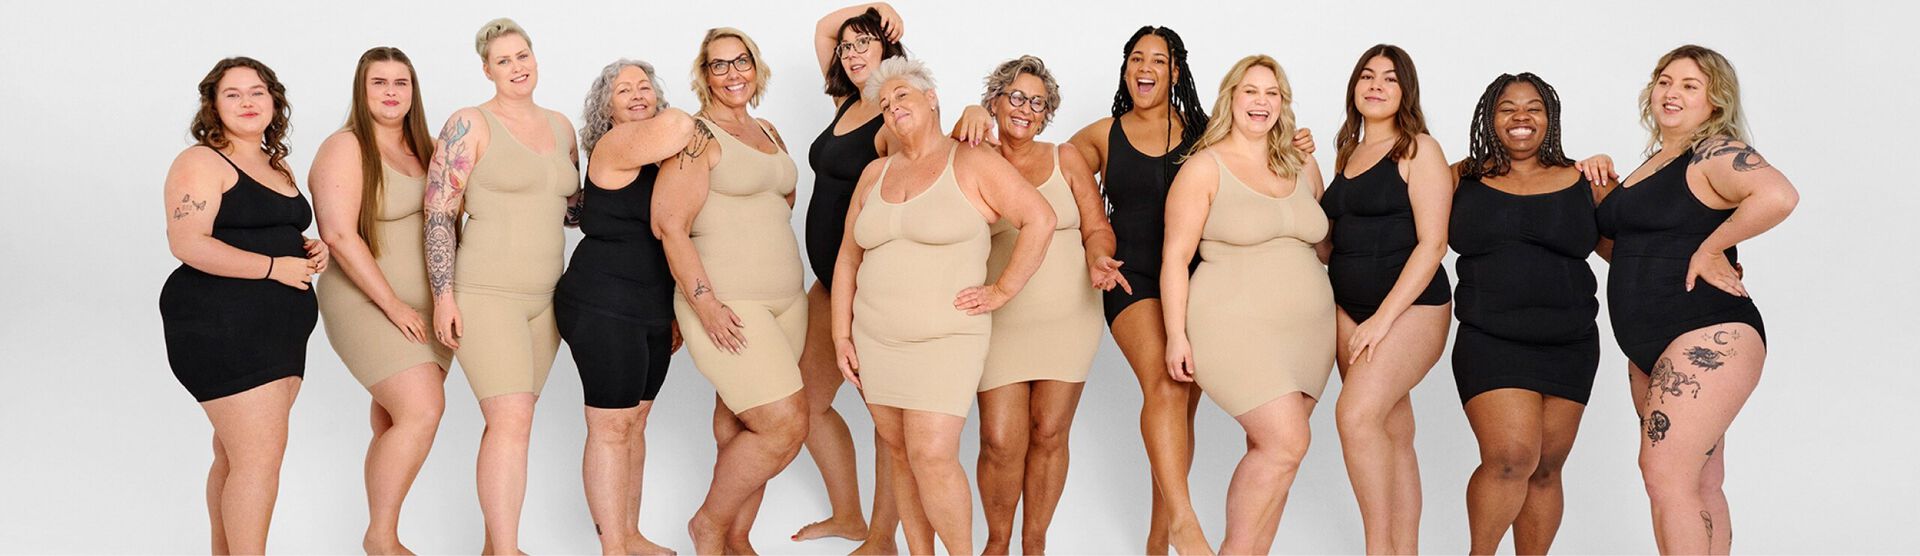 Miladys - There's the perfect set of shapewear for every outfit